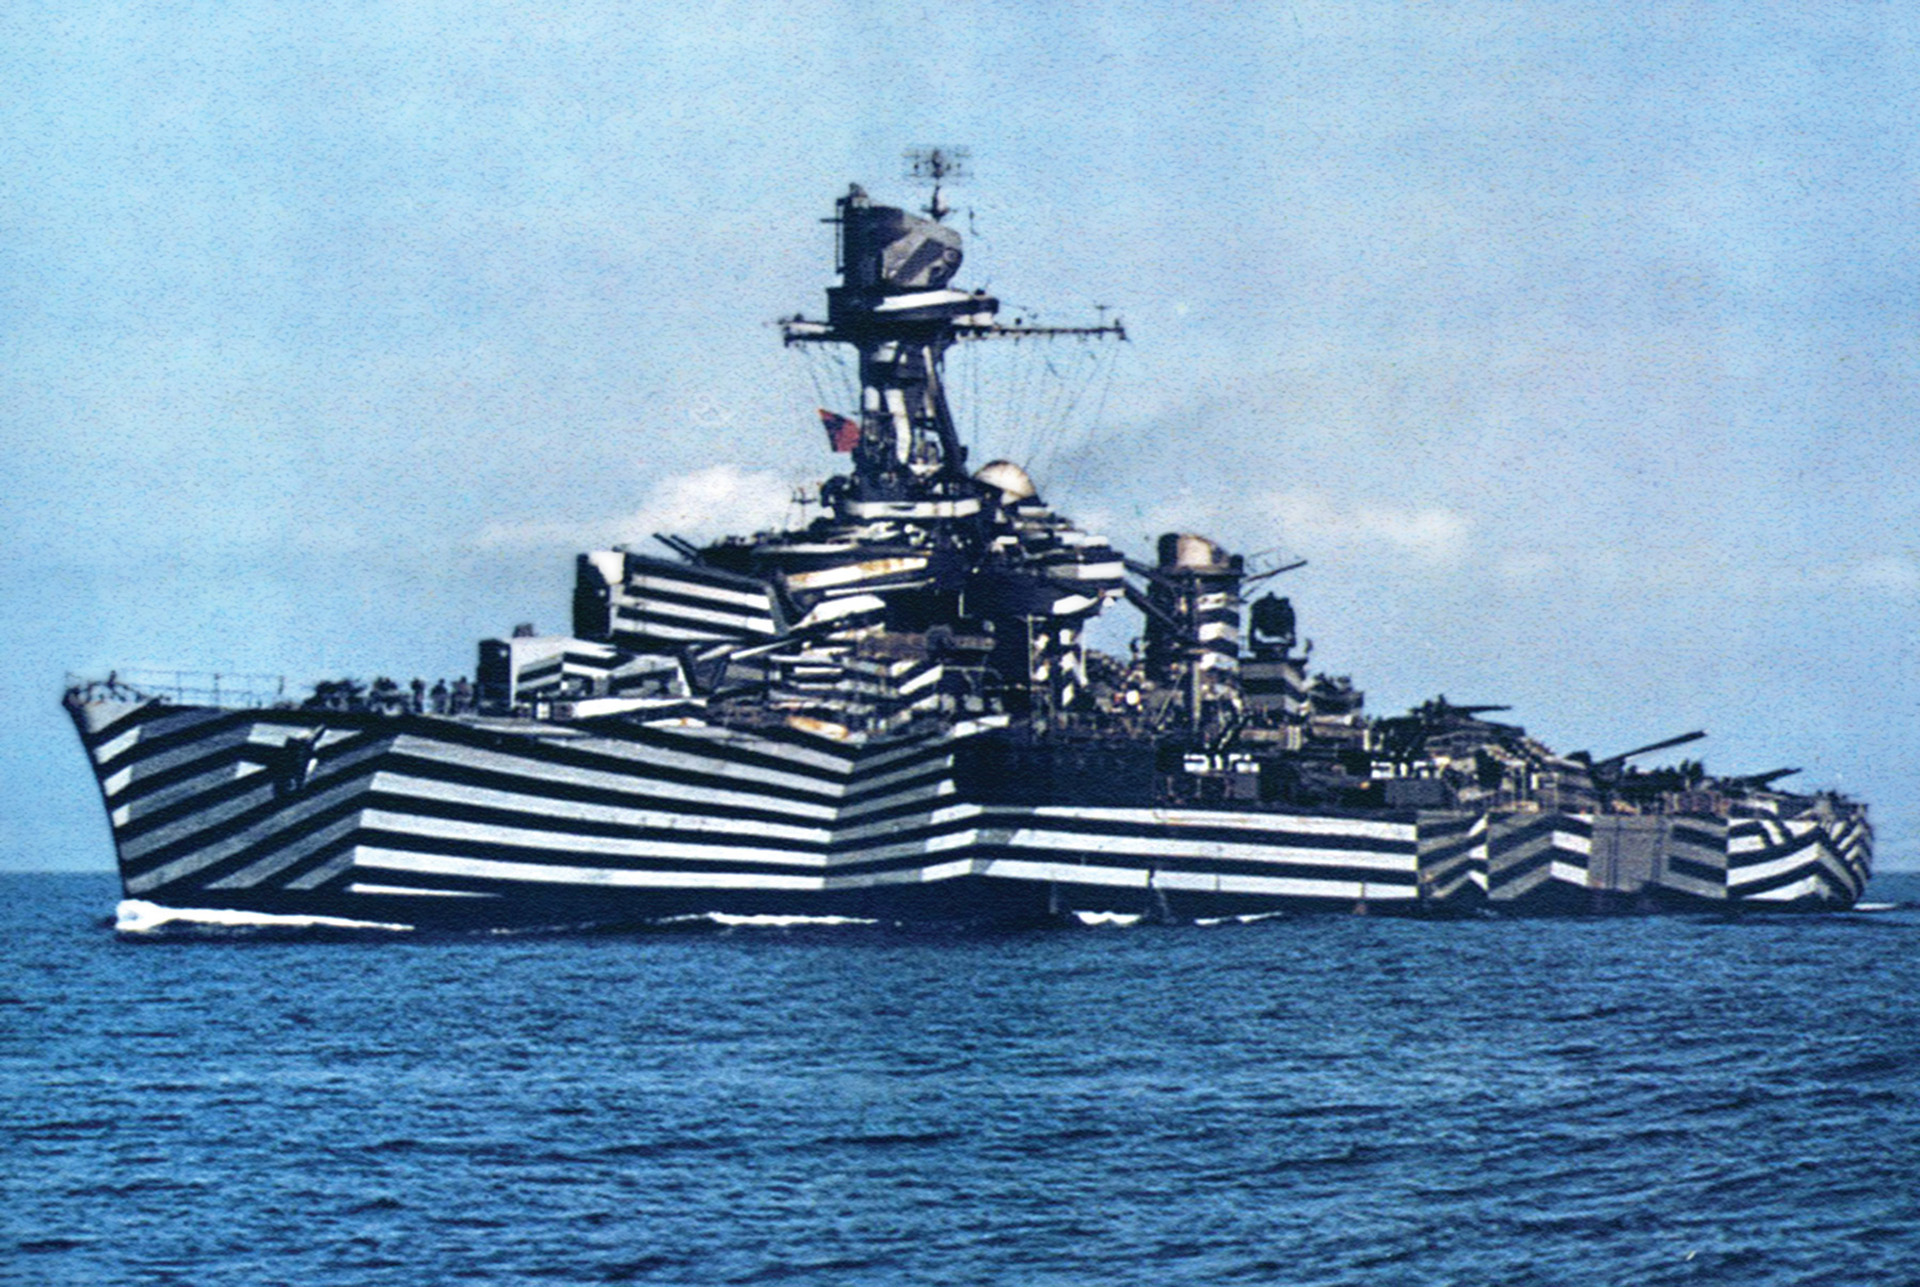 French cruiser Gloire was photographed in 1943 with dazzle camouflage.